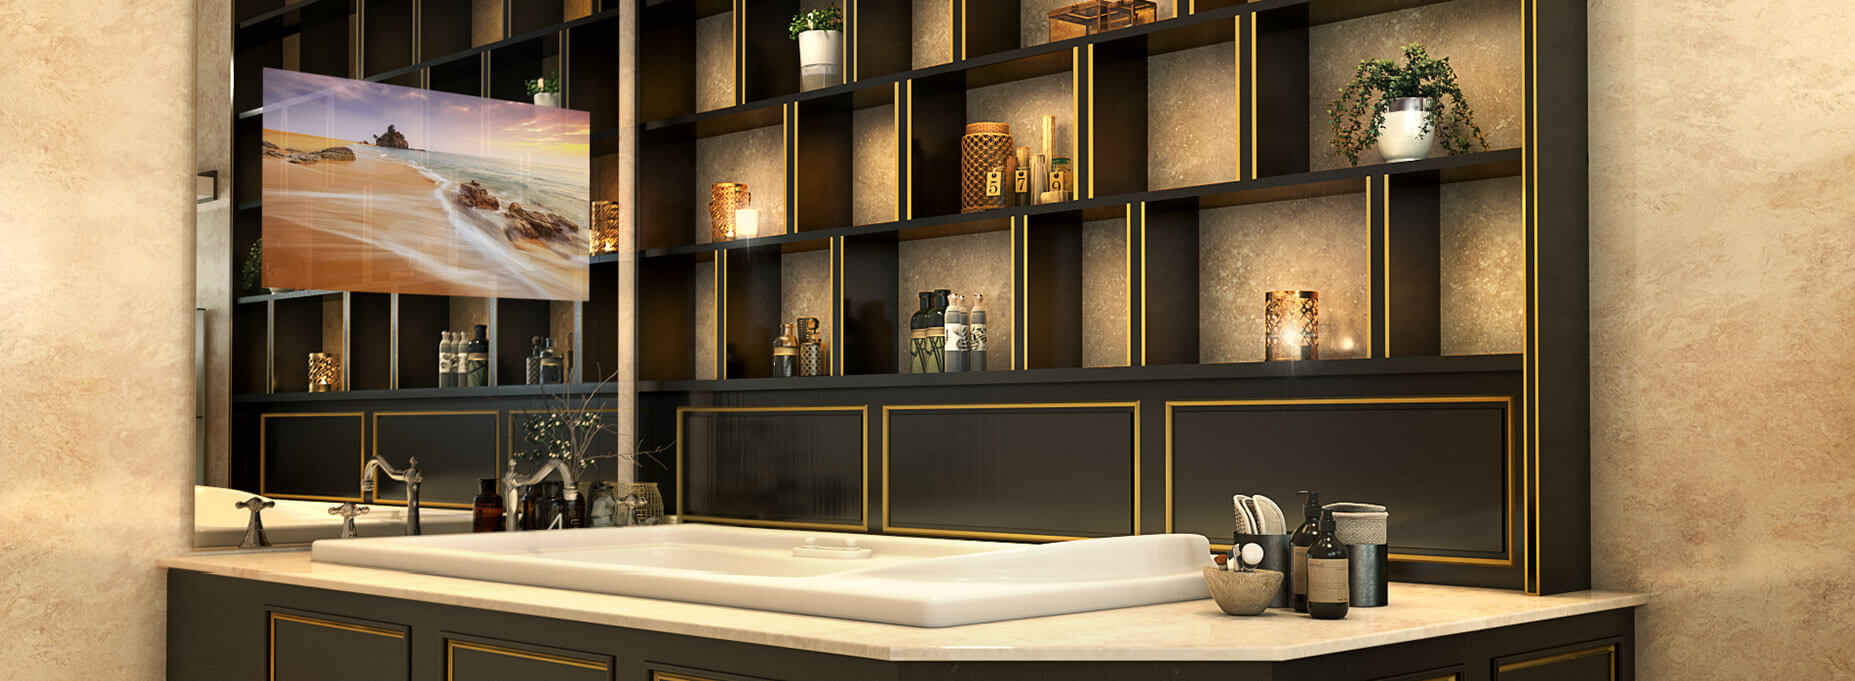 A bathroom full of shelves in black and gold and a tub facing a frameless mirror with its TV showing a beautiful scene of a beach.